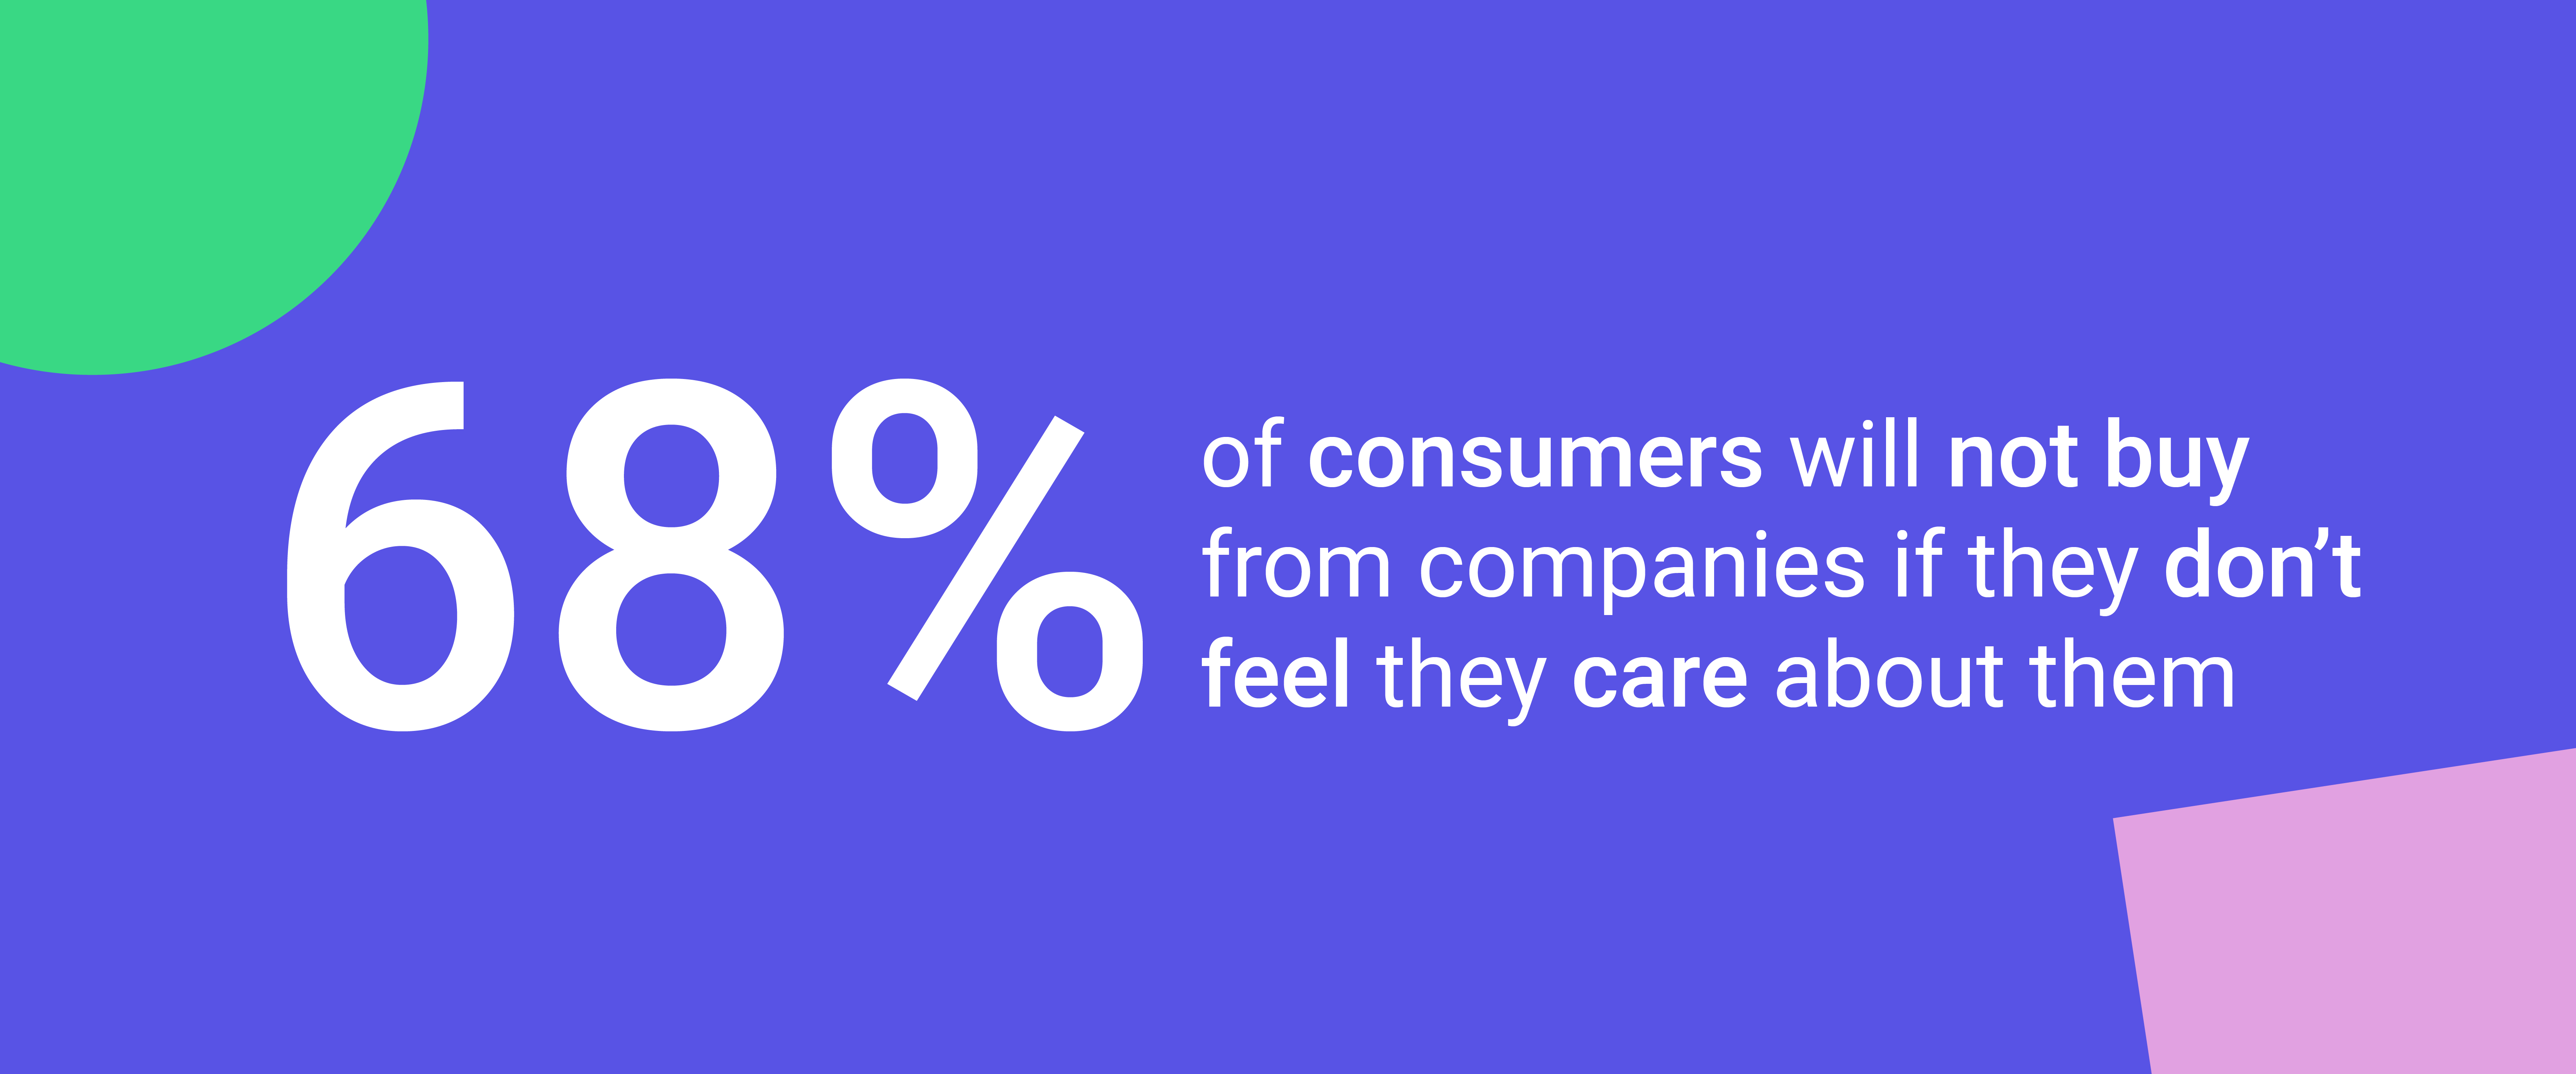 68% of consumers will not buy from companies if they don't feel they care about them